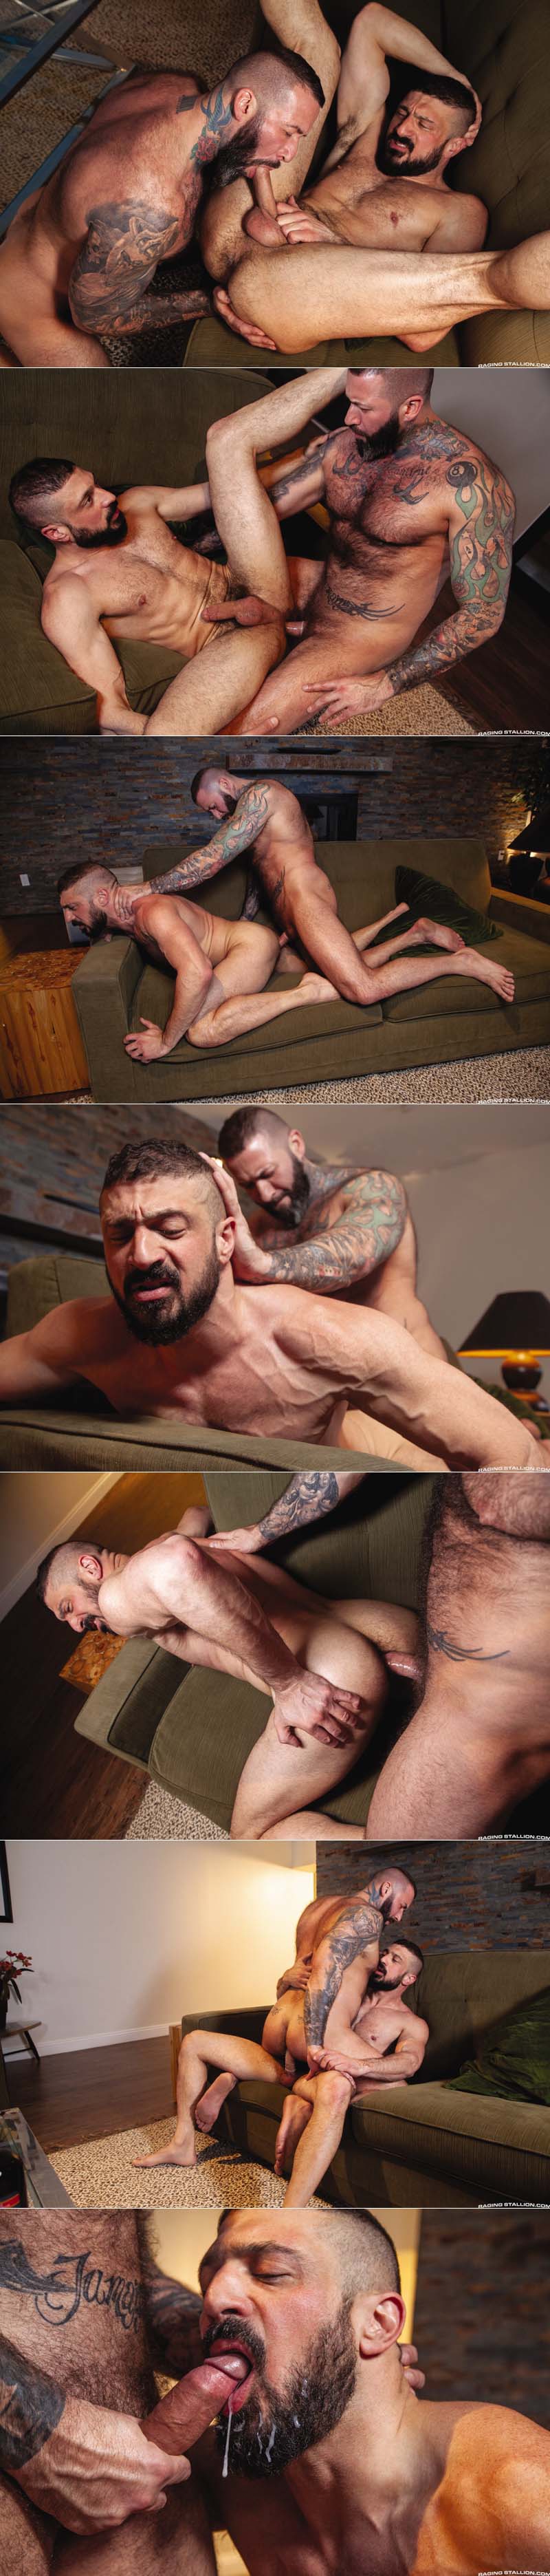 At Large, Scene Two (Alexander Kristov and Marco Napoli Flip-Fuck) at Raging Stallion